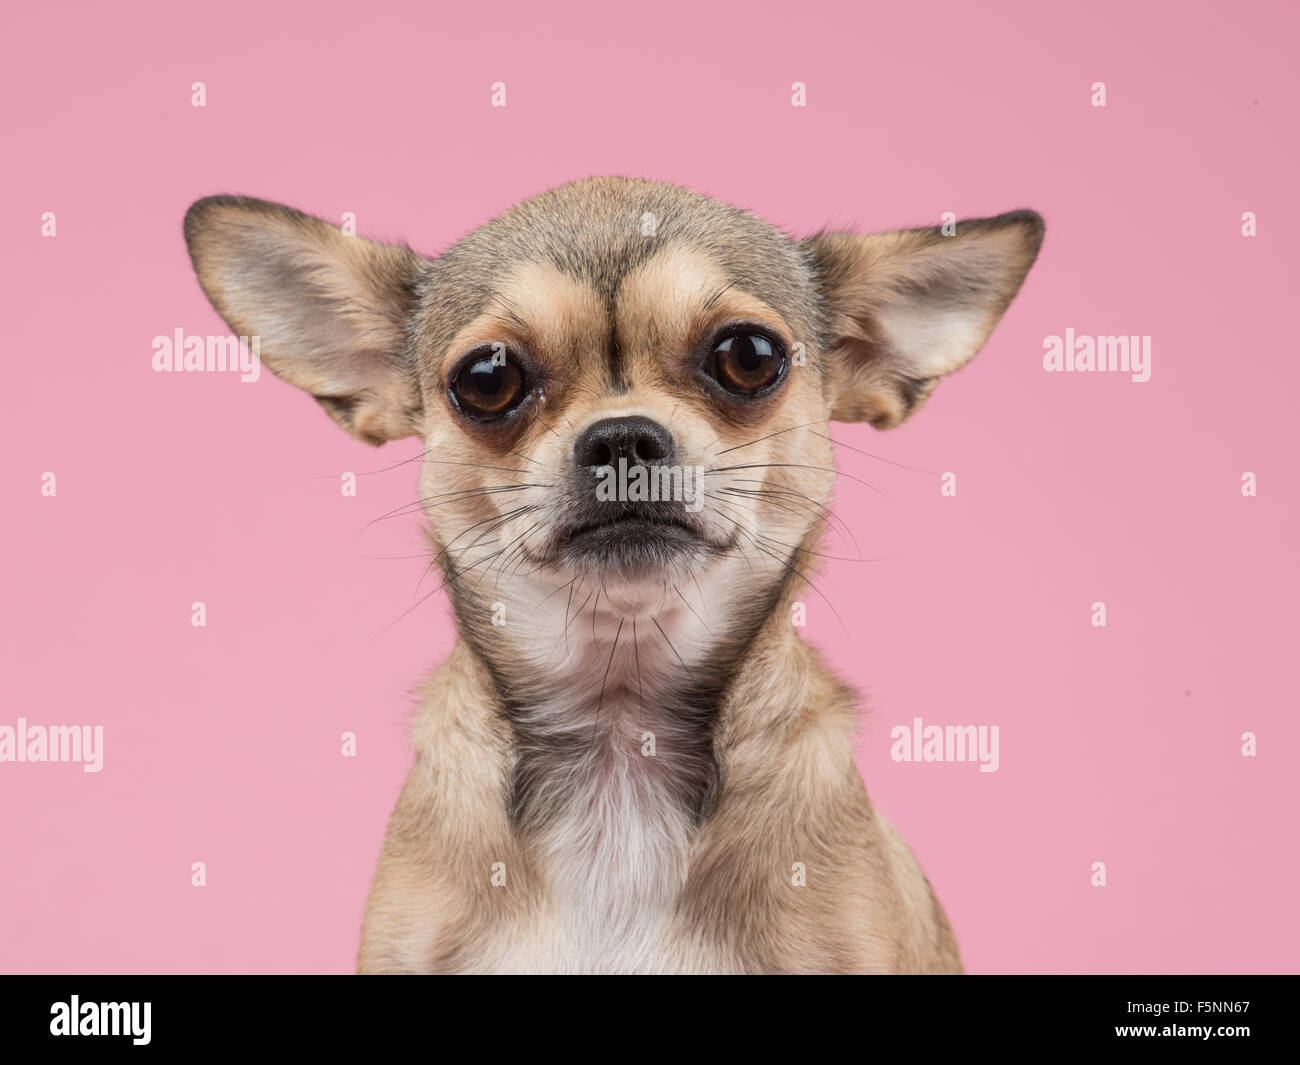 Chihuahua portrait on a pink background Stock Photo